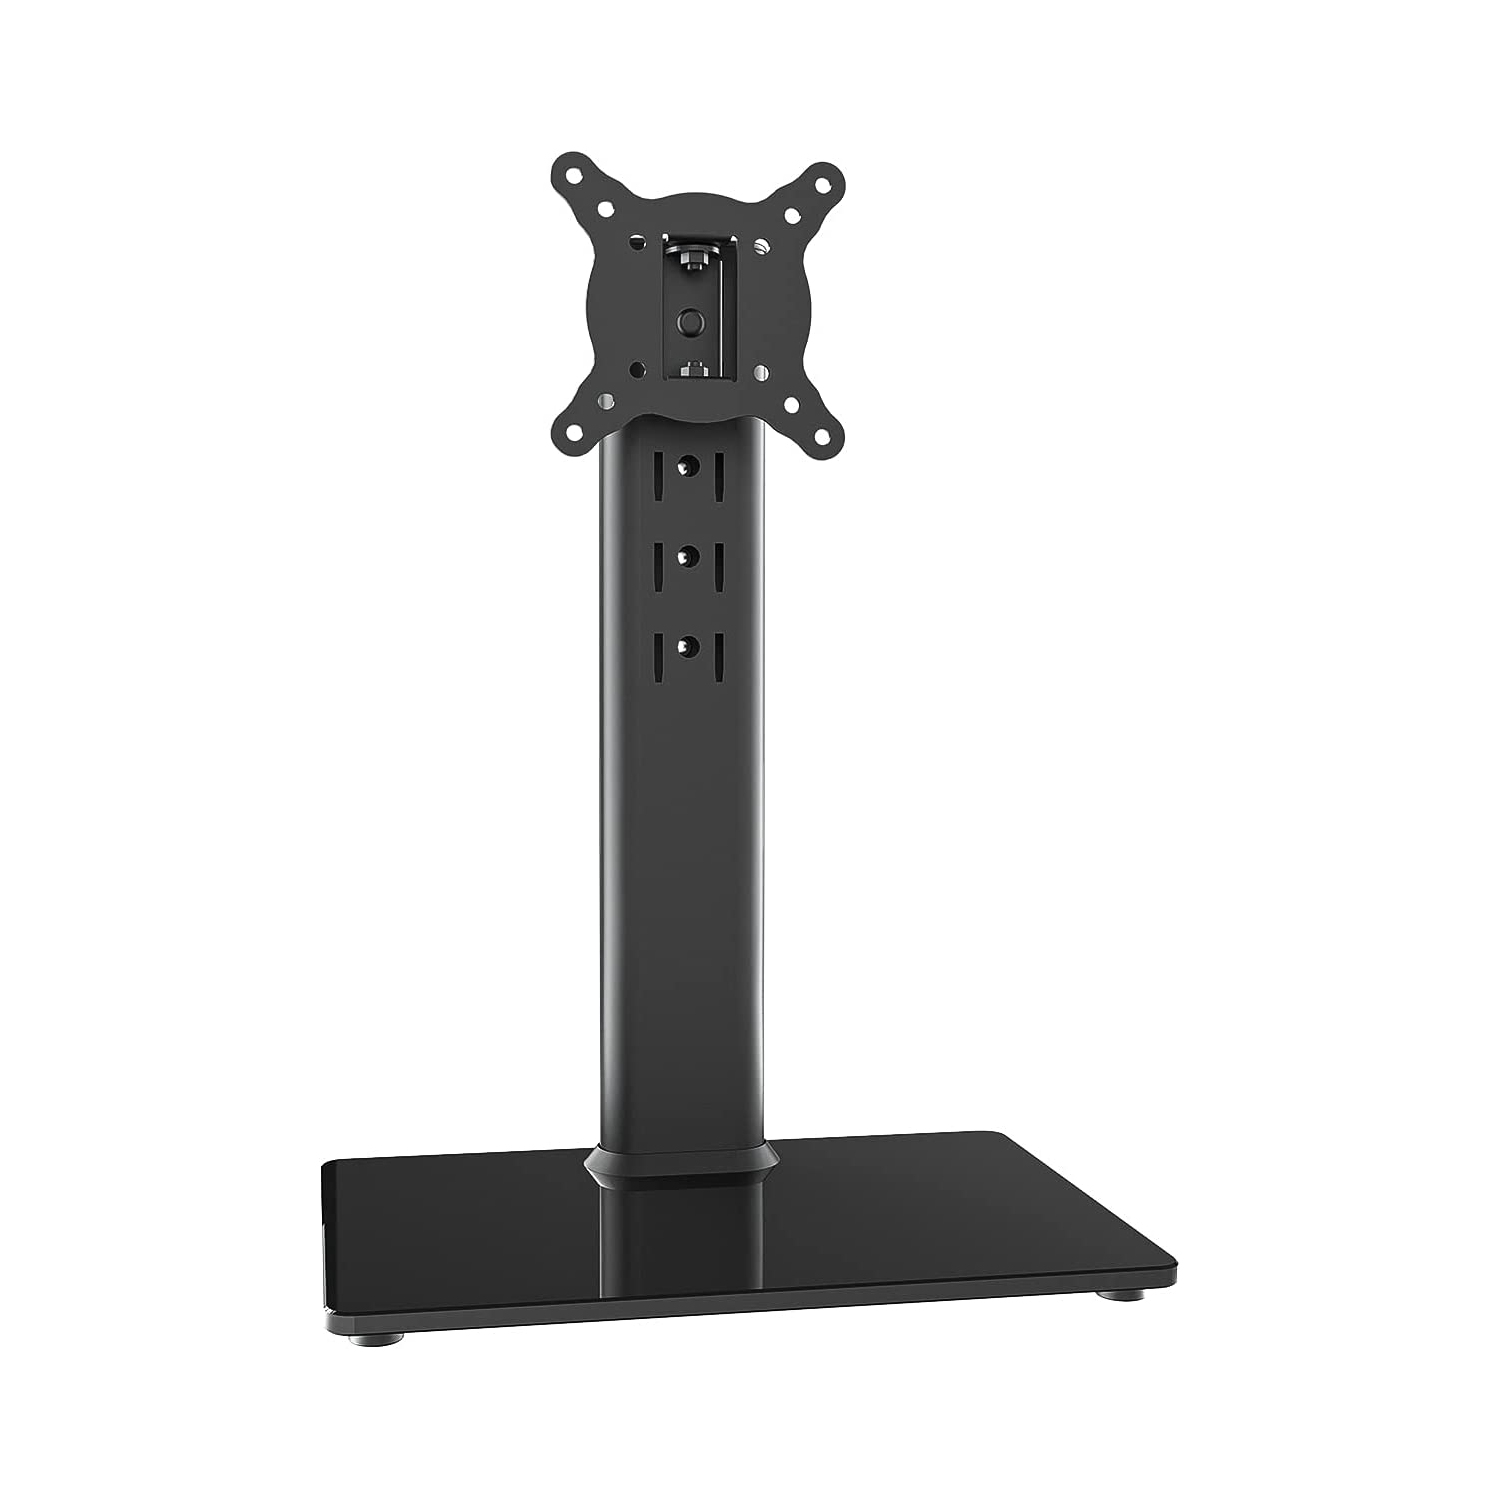 Universal Swivel TV Stand/Base Table Top TV Stand for 13 to 32 inch TVs with 100 Degree Swivel, 4 Level Height